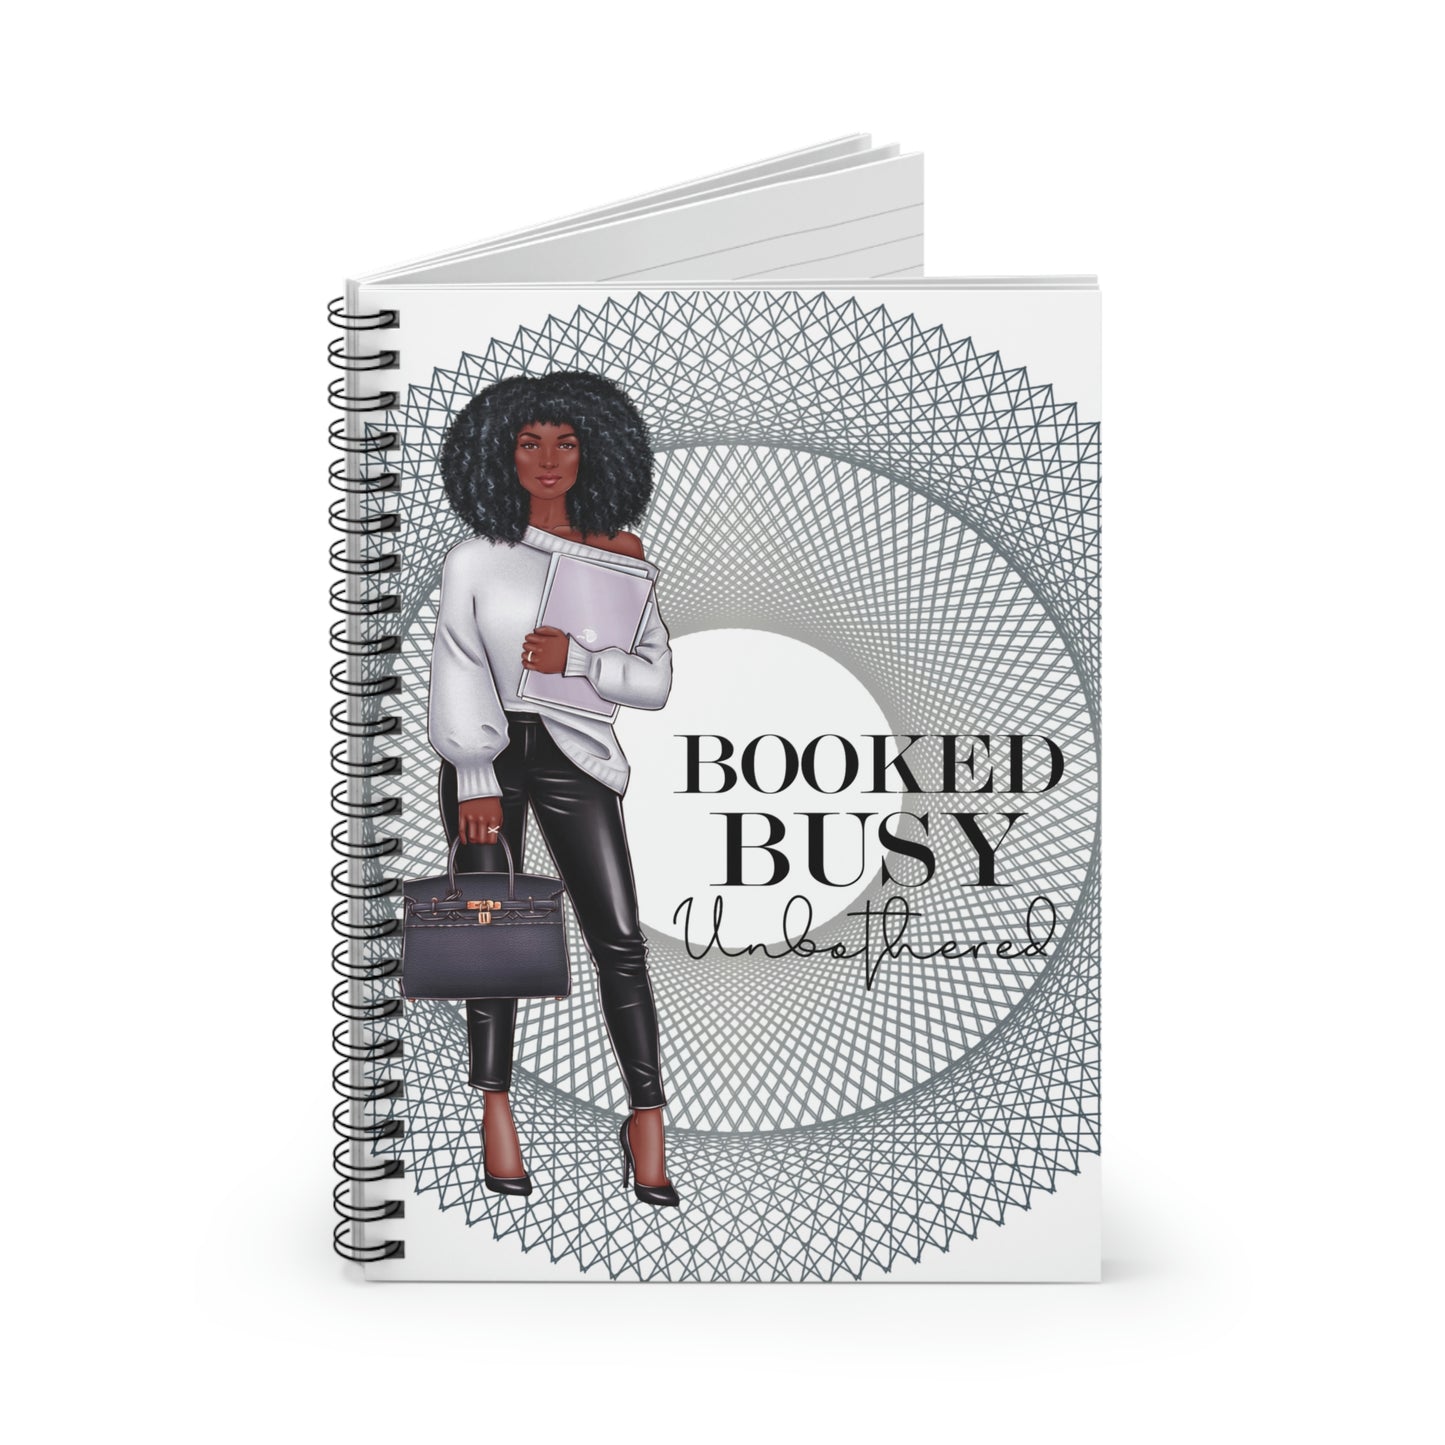 Booked, Busy, Unbothered (African American) (Silver Spiral Cover) Spiral Notebook - Ruled Line